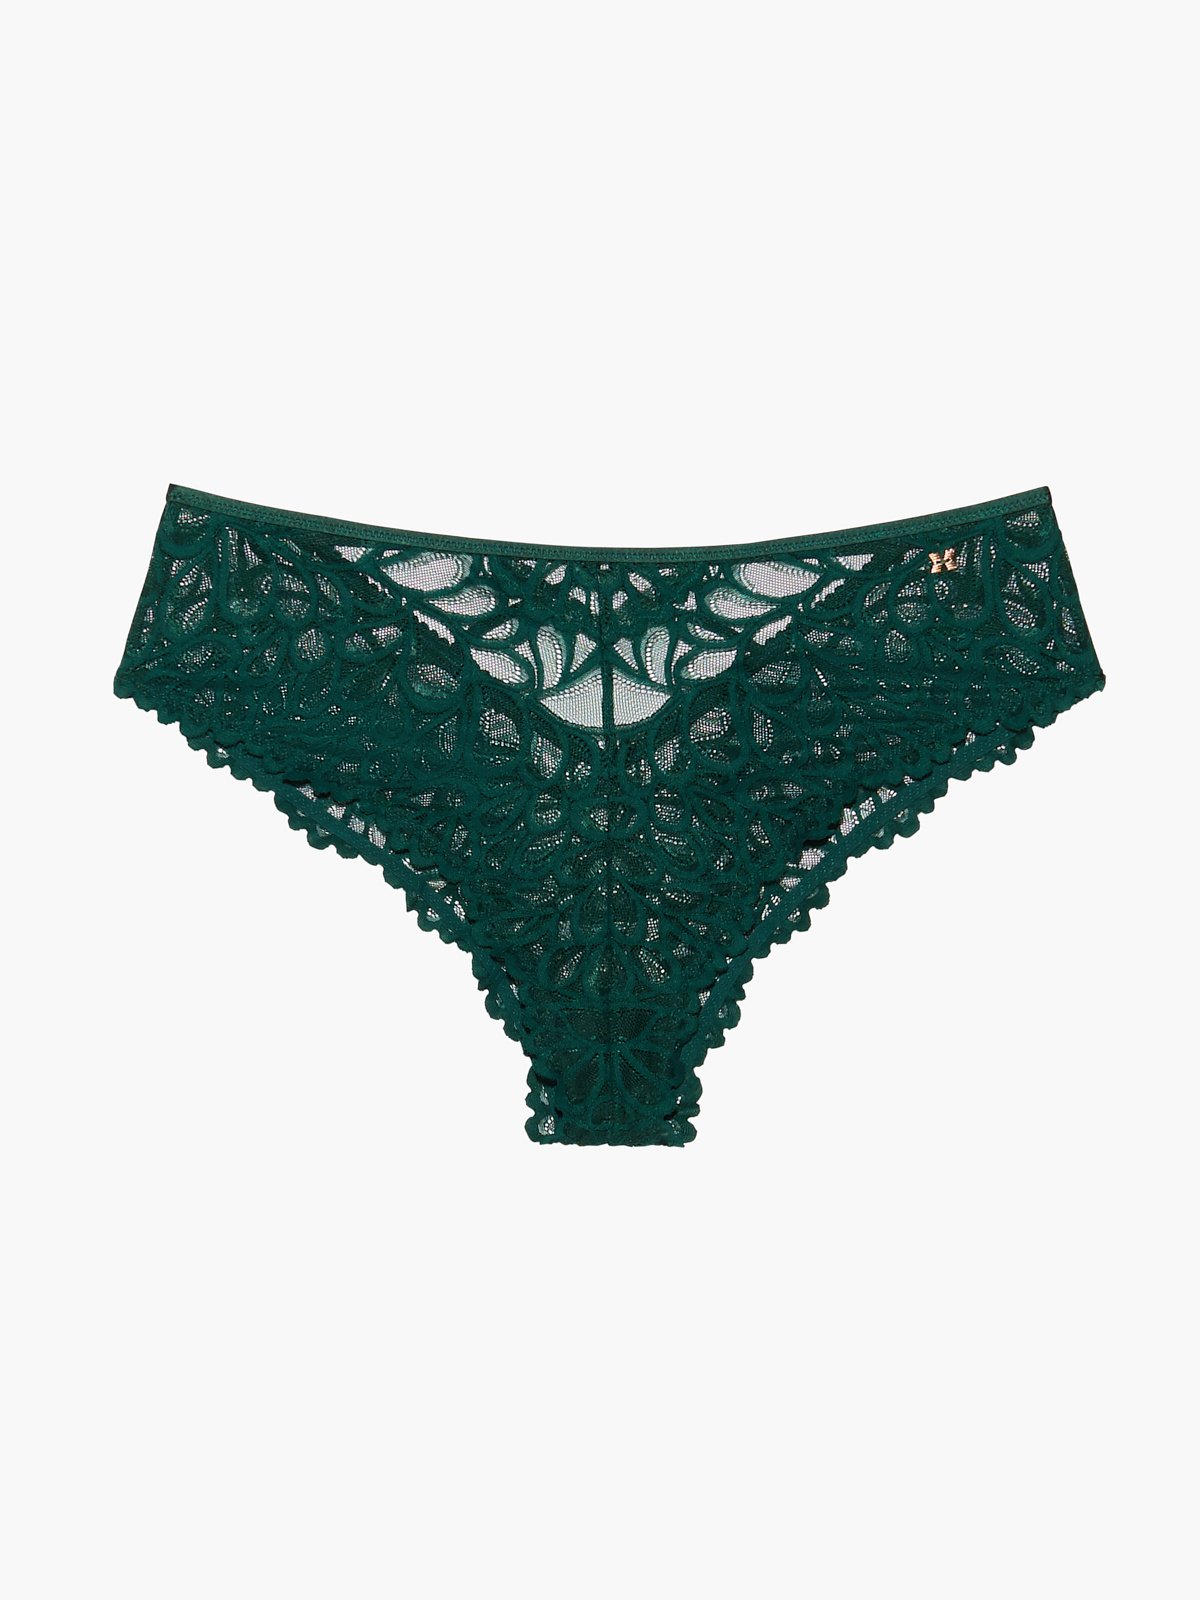 French Affair Women's Lace Cheeky Underwear 3-Pack - Pink Cosmos/Rifle  Green/Black